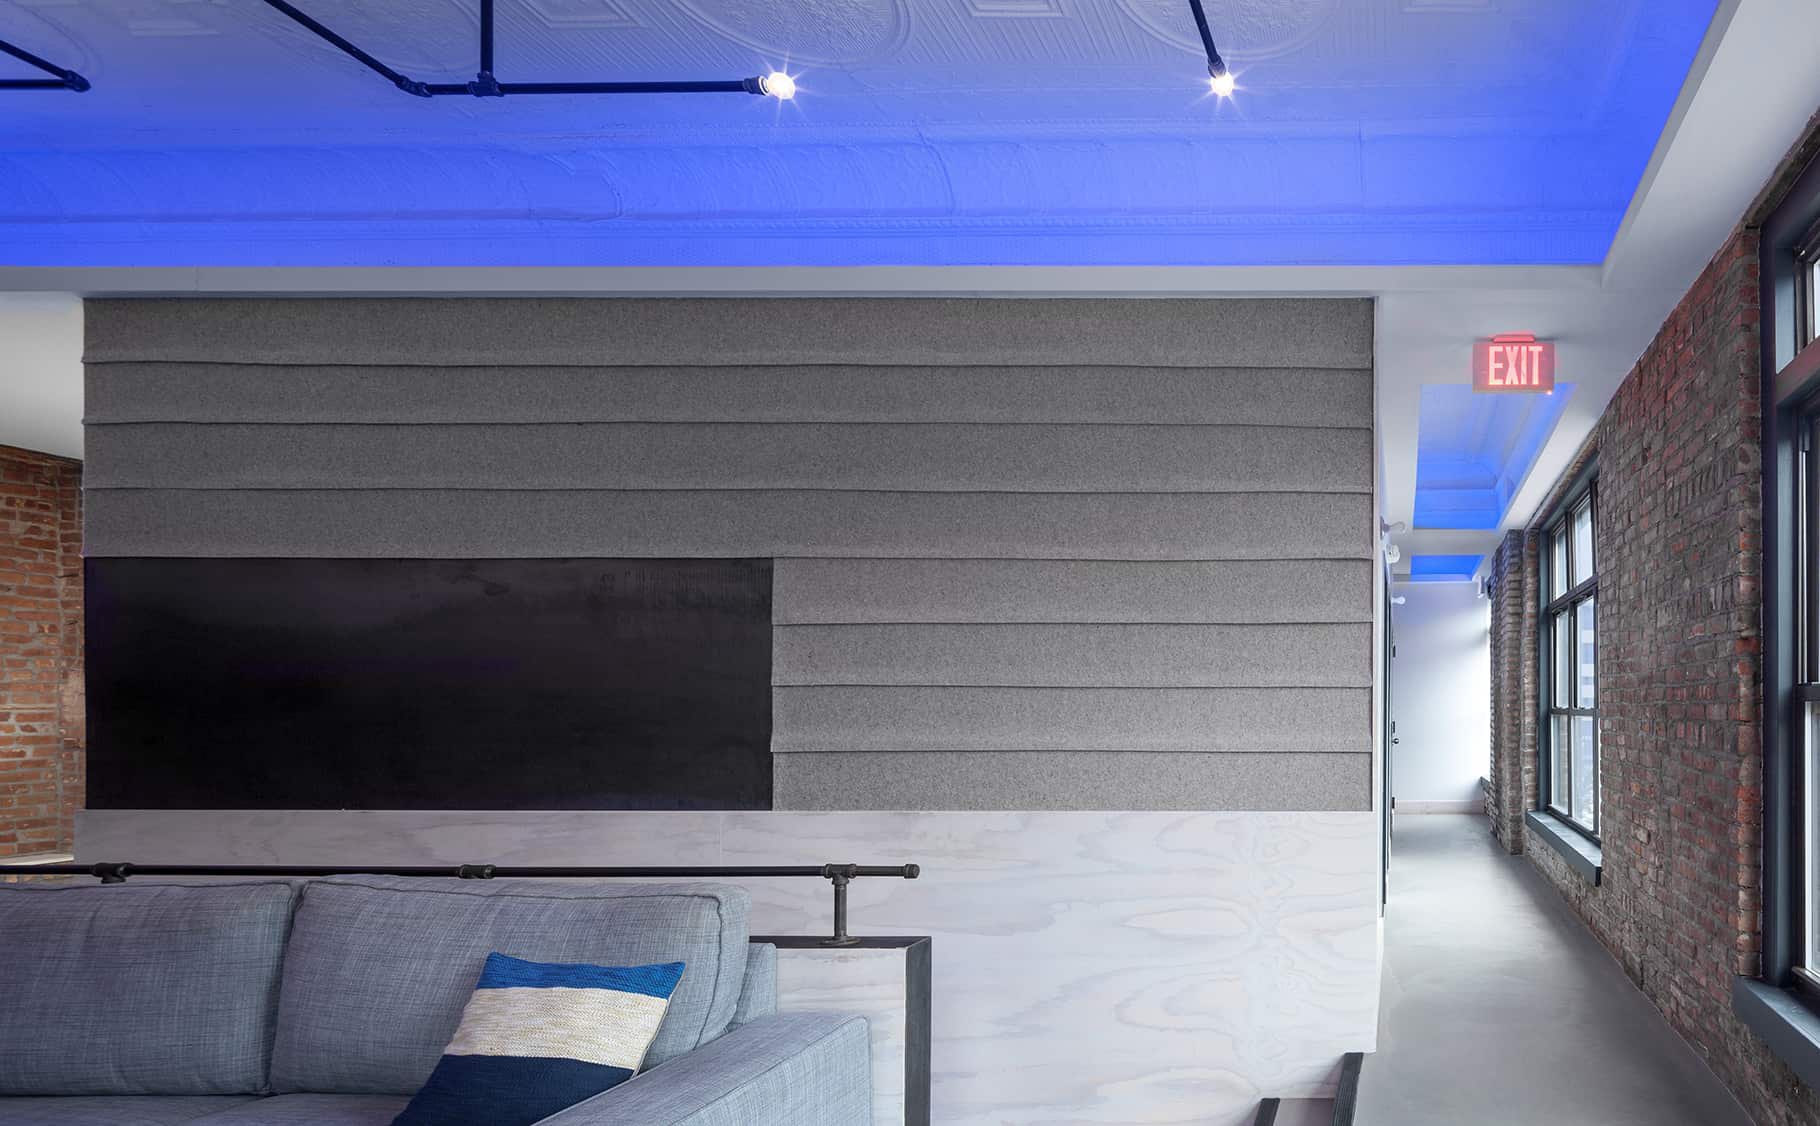 NYC Architect Architecture Modern Wellness Design Float Spa Commercial Renovate Renovation Flotation Therapy Exposed Brick Blue Light Tin Ceiling